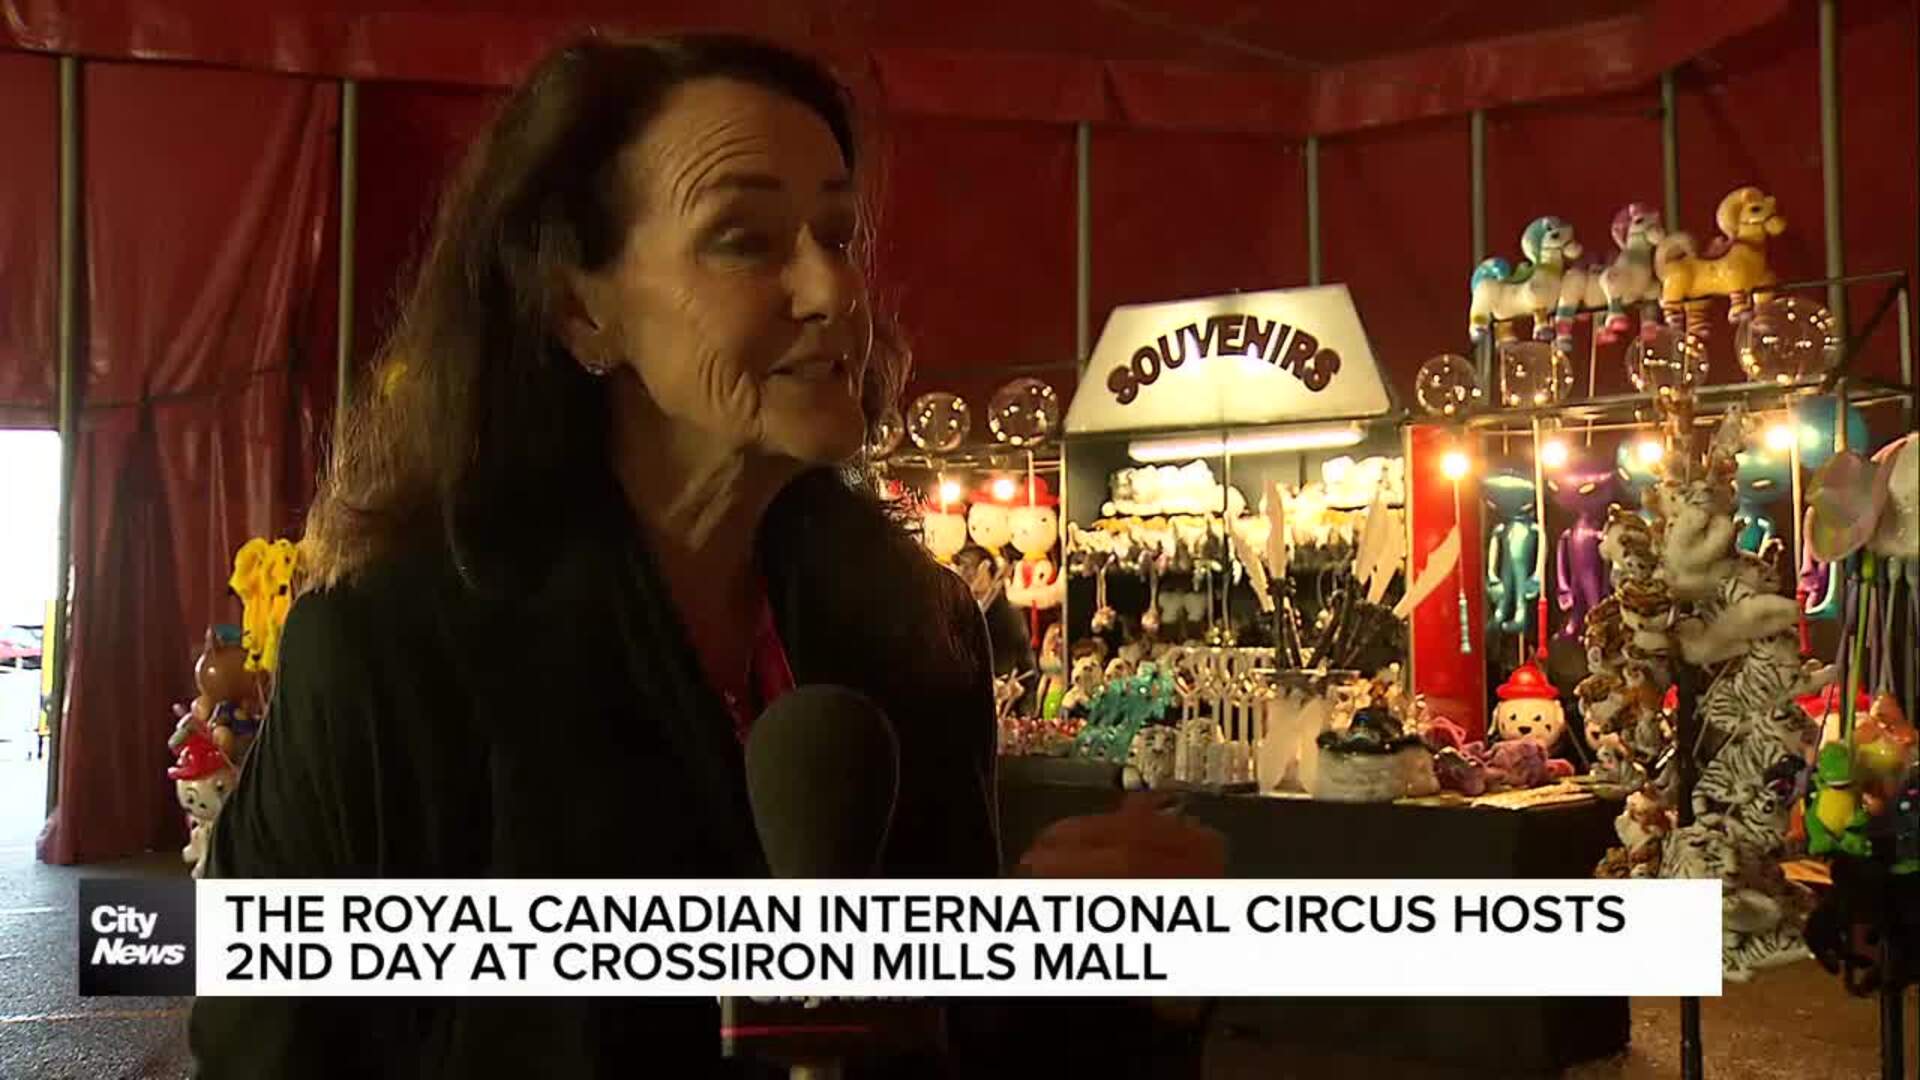 The Royal Canadian International Circus hosts 2nd day at CrossIron Mills Mall